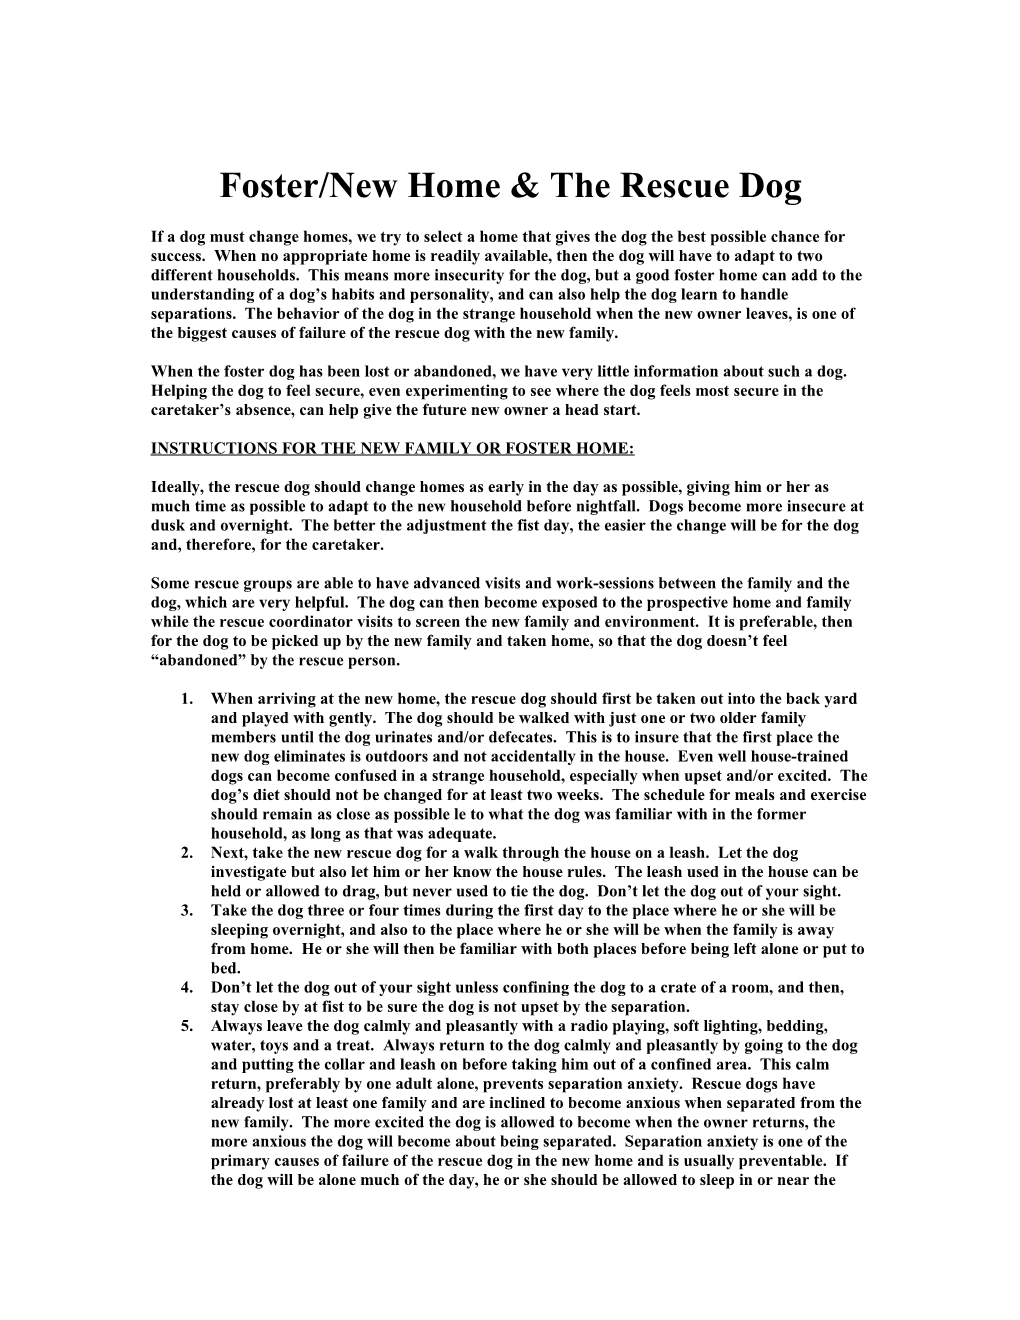 Foster/New Home & the Rescue Dog